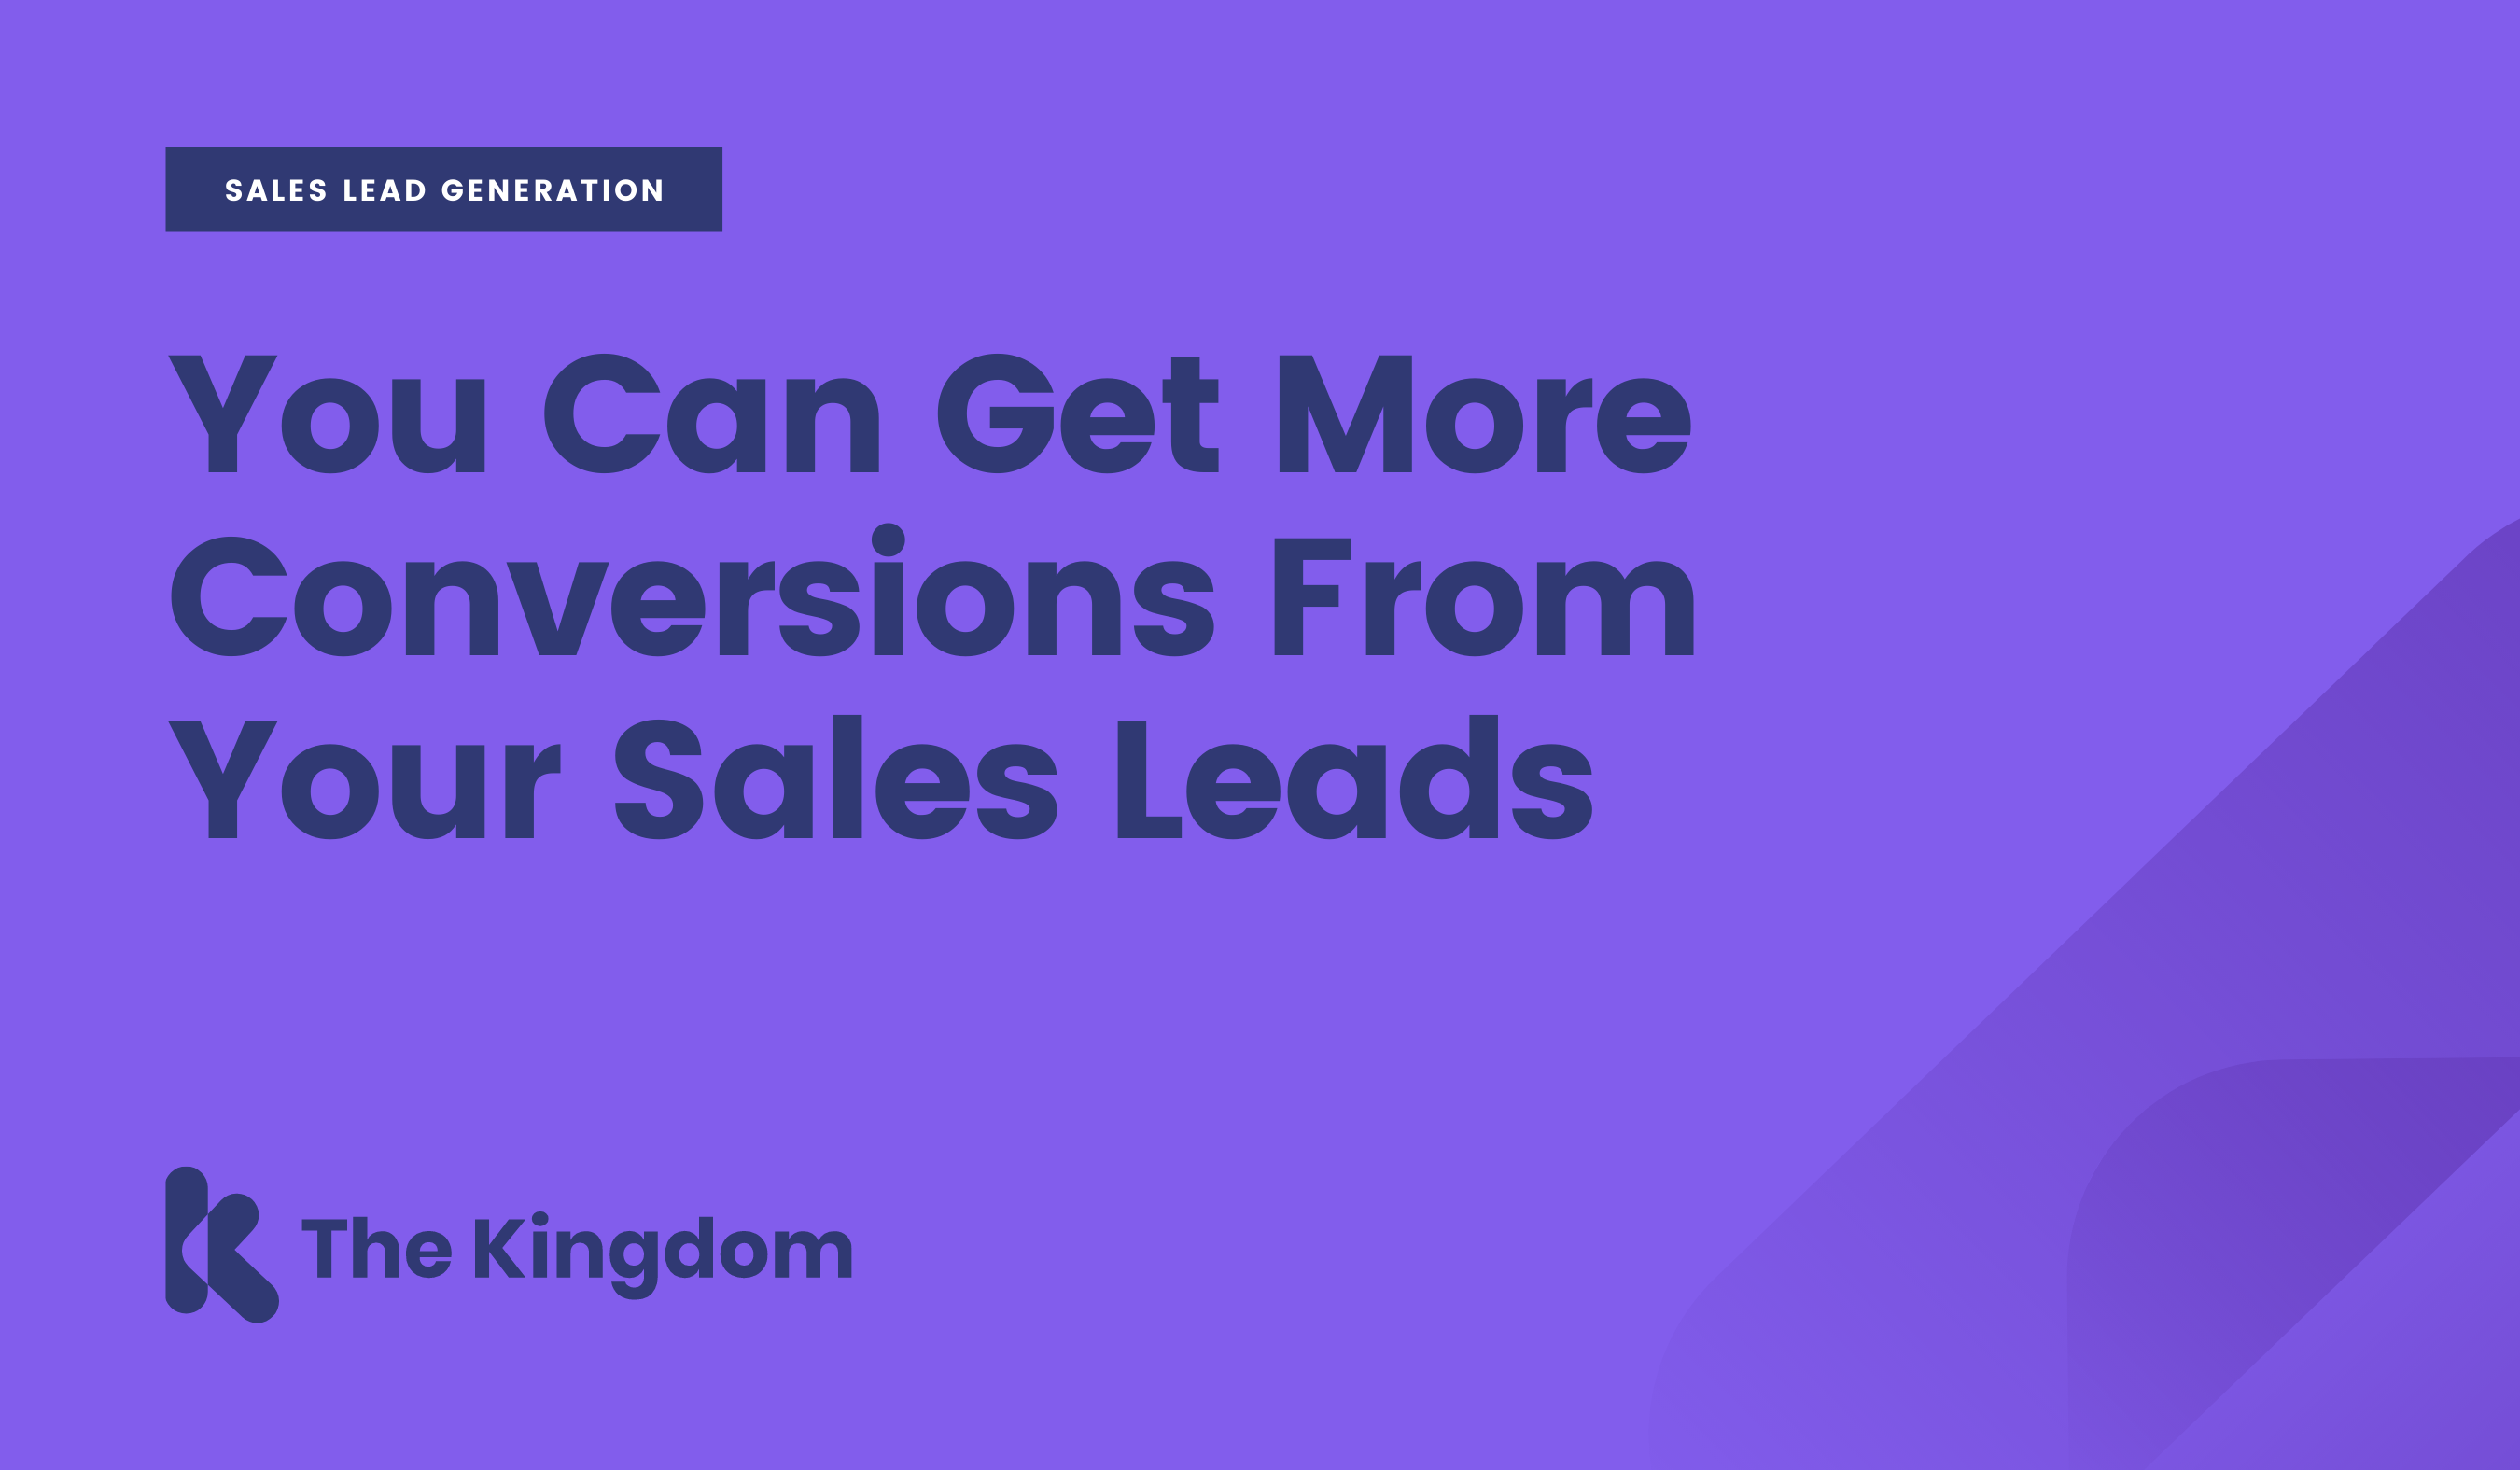 You Can Get More Conversions From Your Sales Leads.